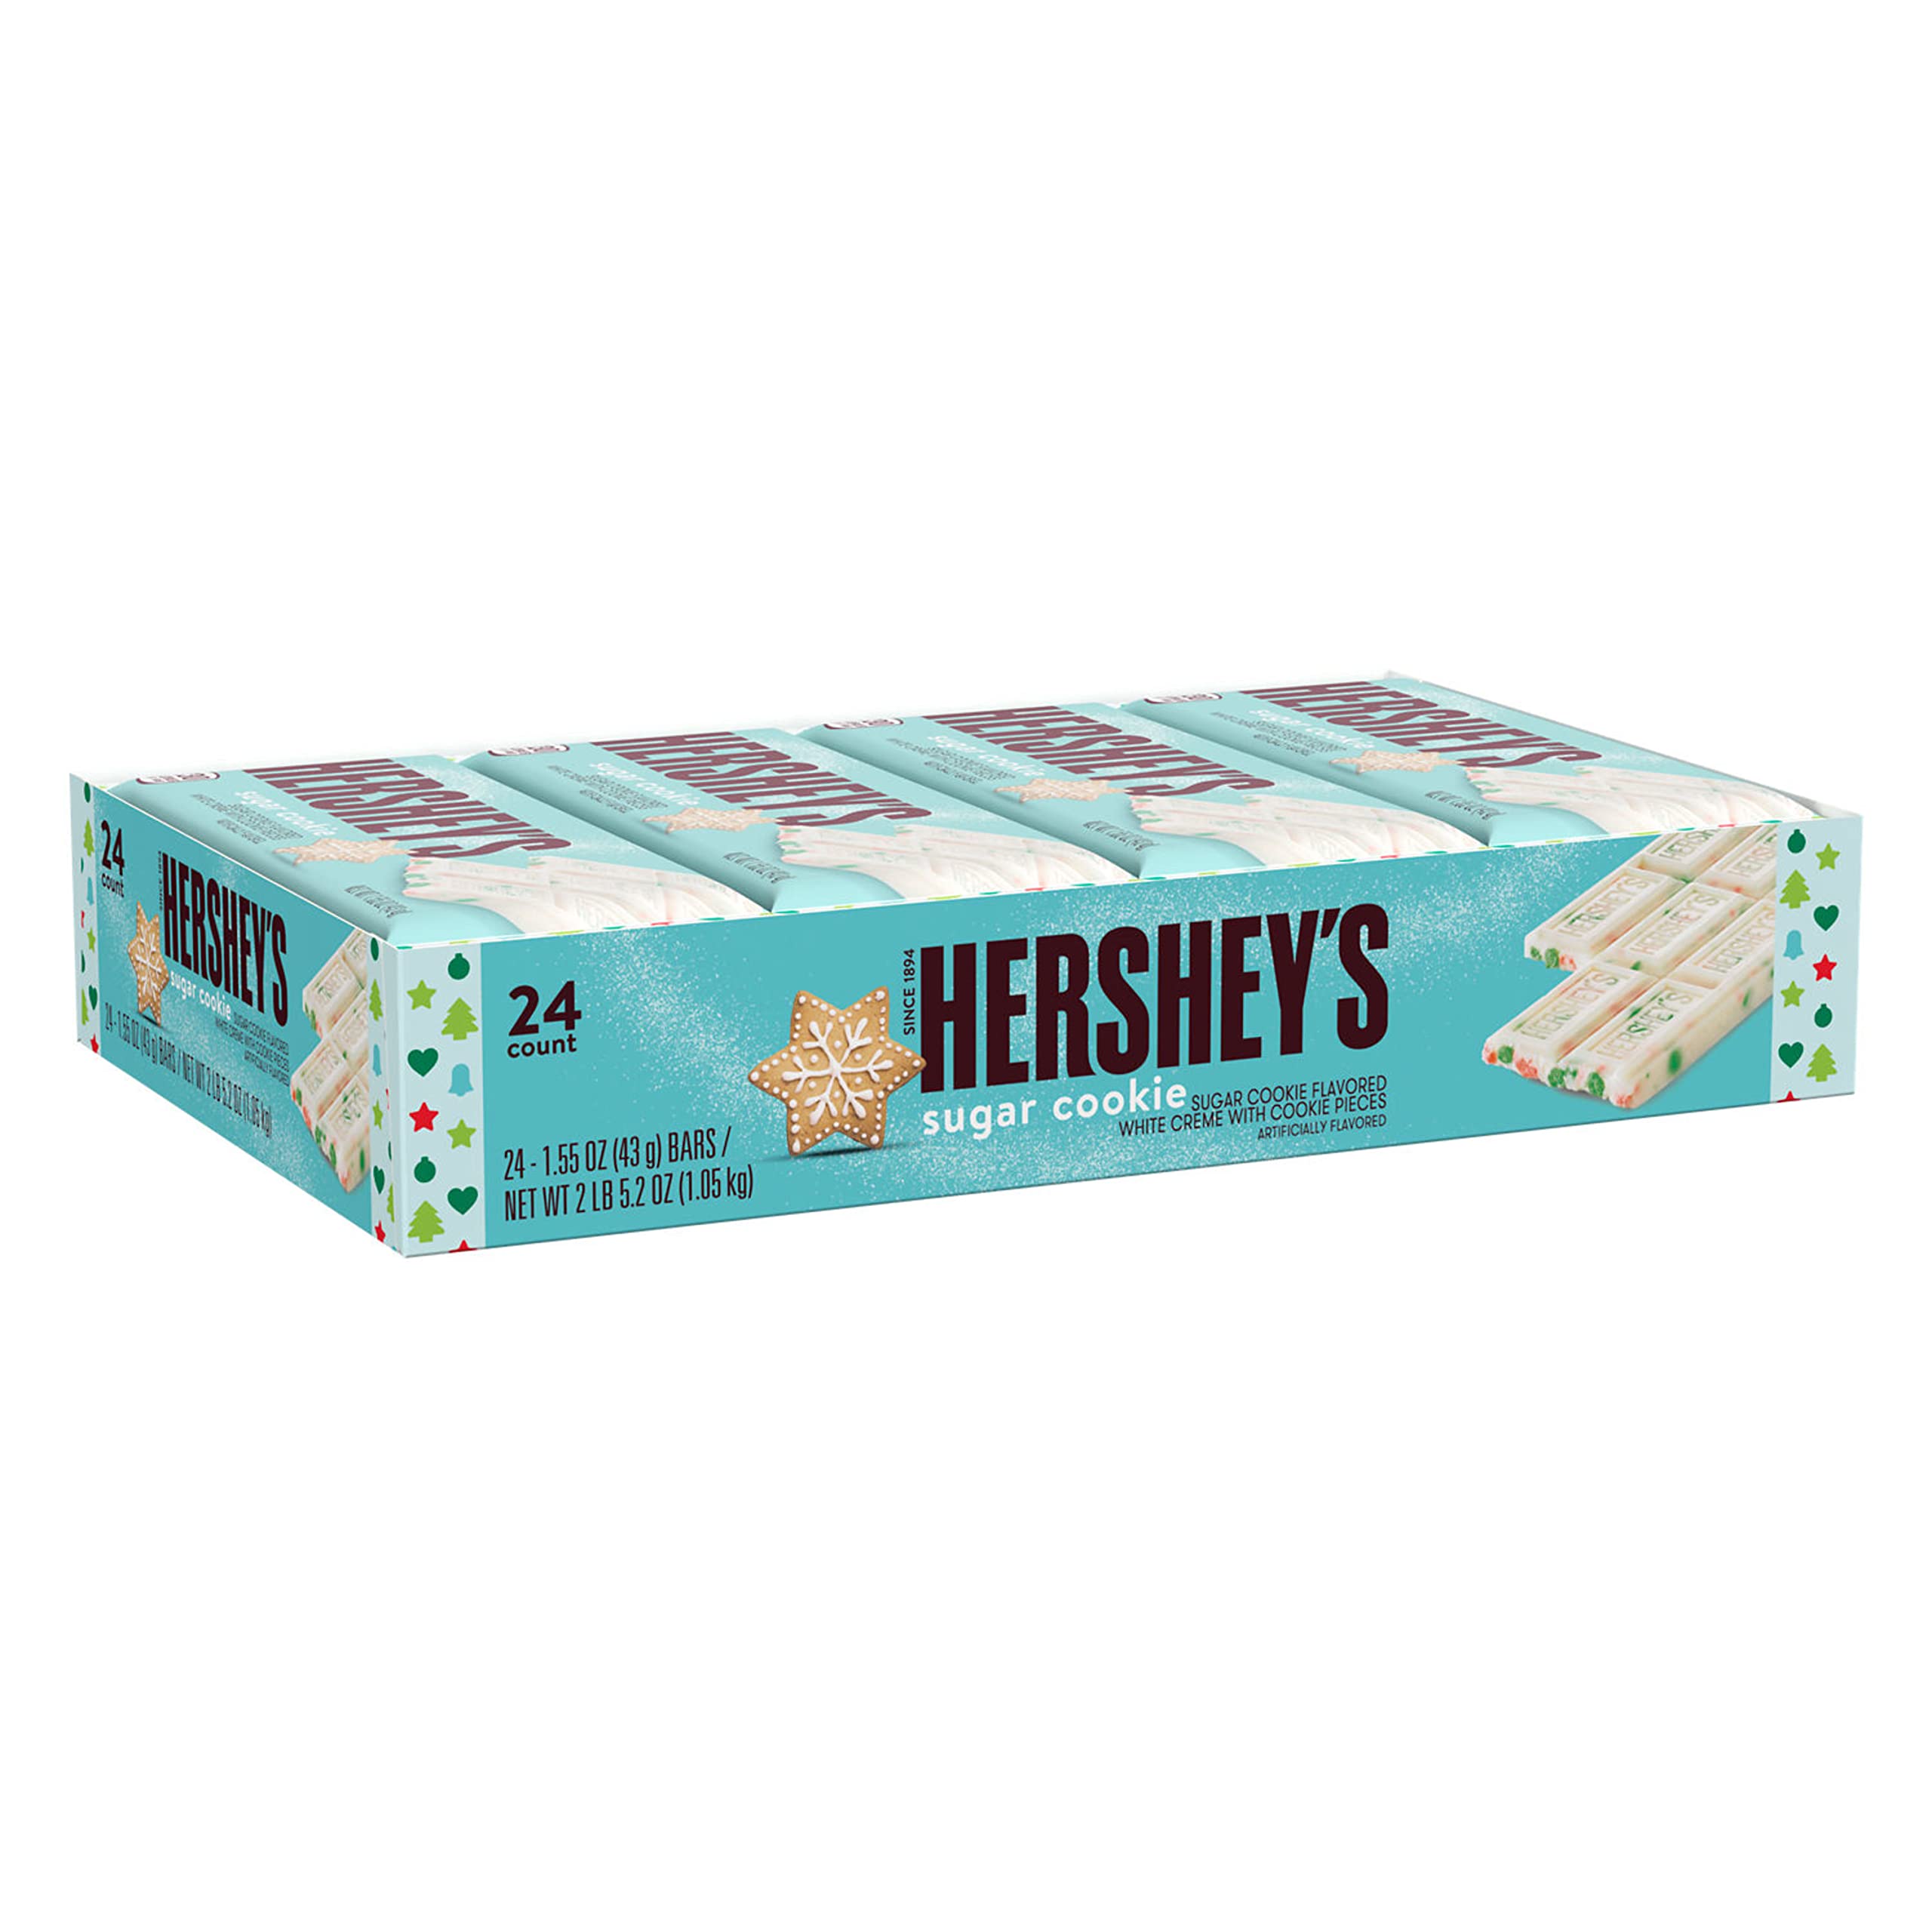 24-Count 1.55-Oz Hershey's Sugar Cookie Flavored Candy Bars $10.71 ($0.45/Bar) w/ S&S + Free Shipping w/ Prime or on $35+